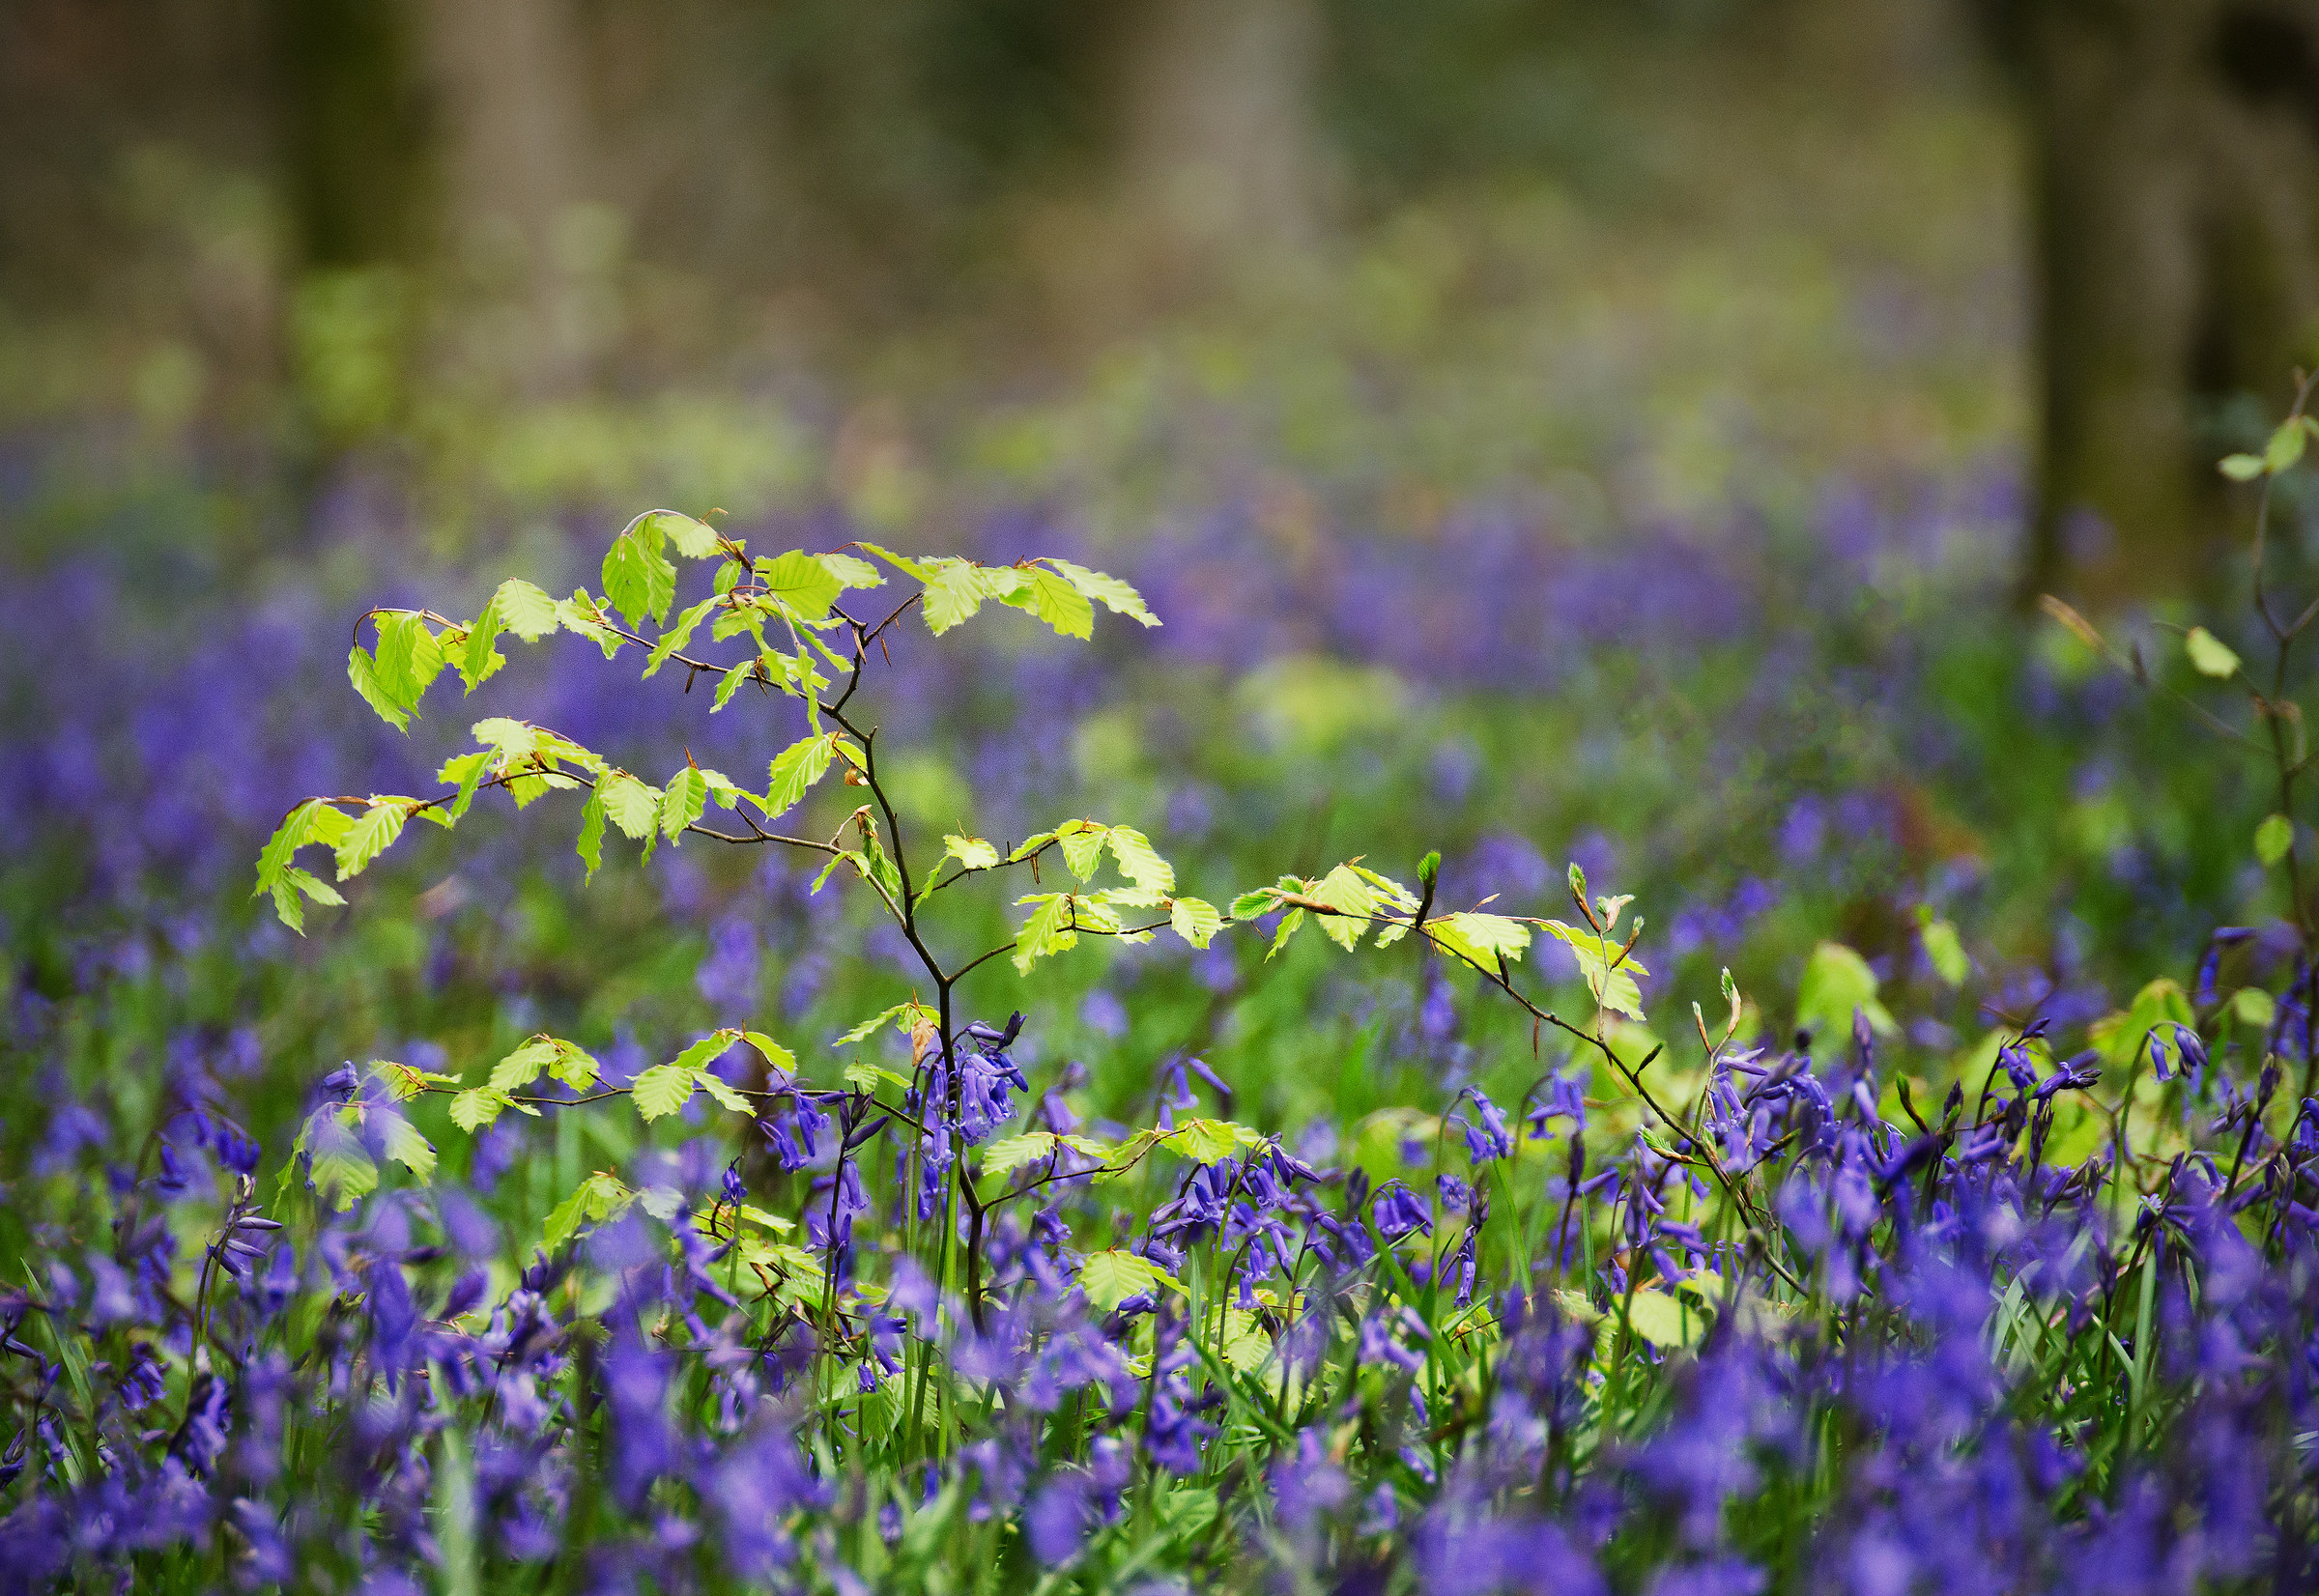 The Sapling in the Bluebell Wood...